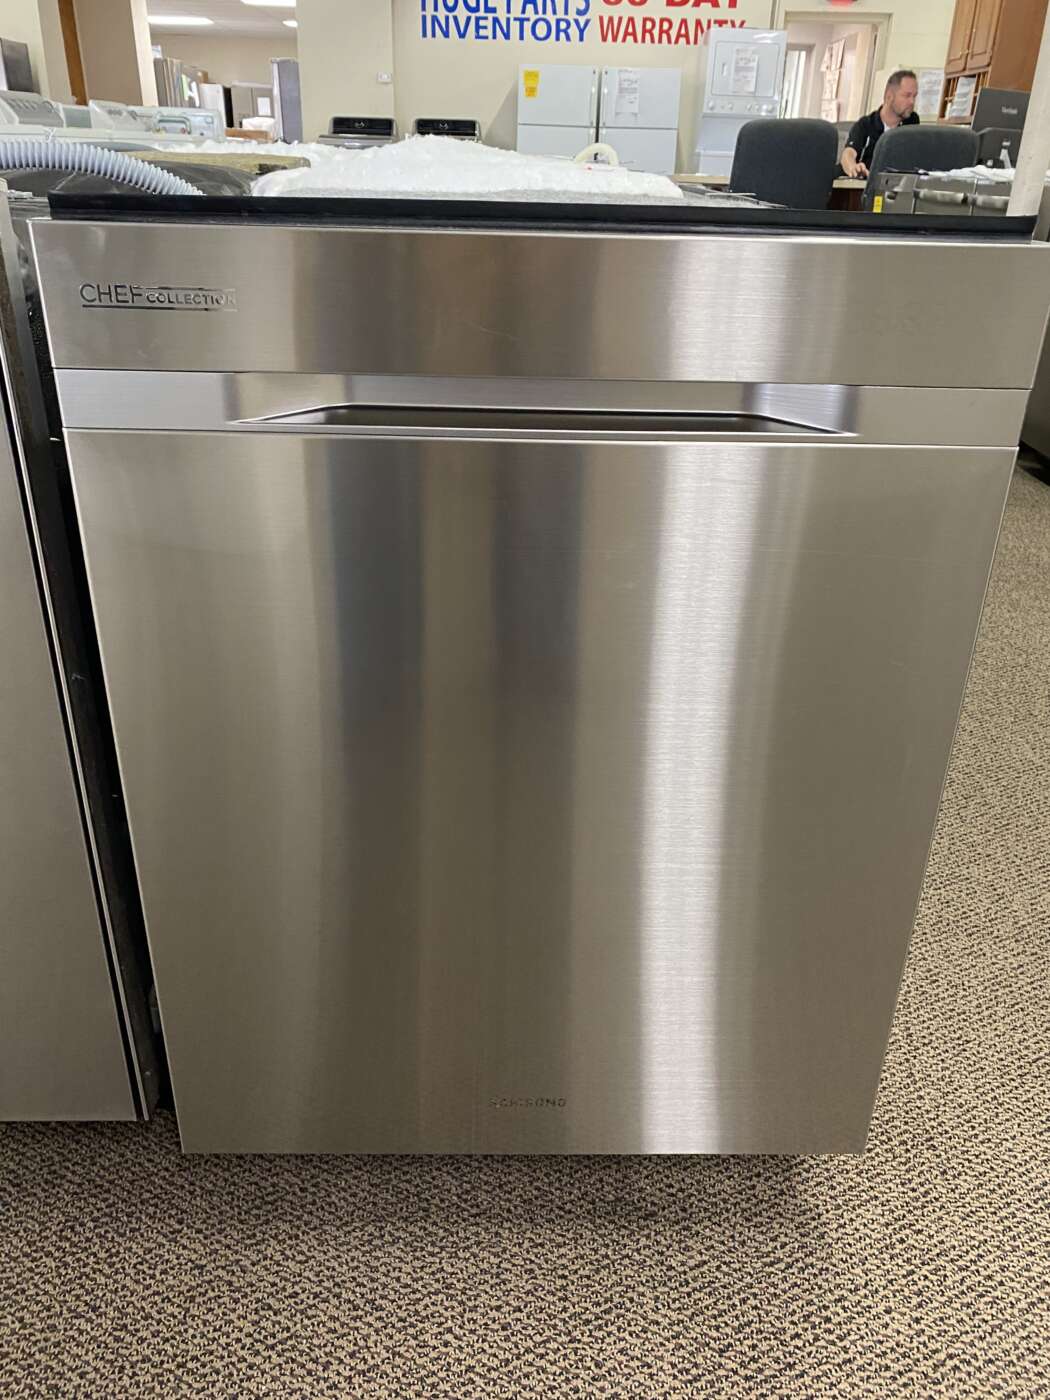 Reconditioned SAMSUNG Stainless-Tub Built-In Dishwasher With 3-Racks – Stainless